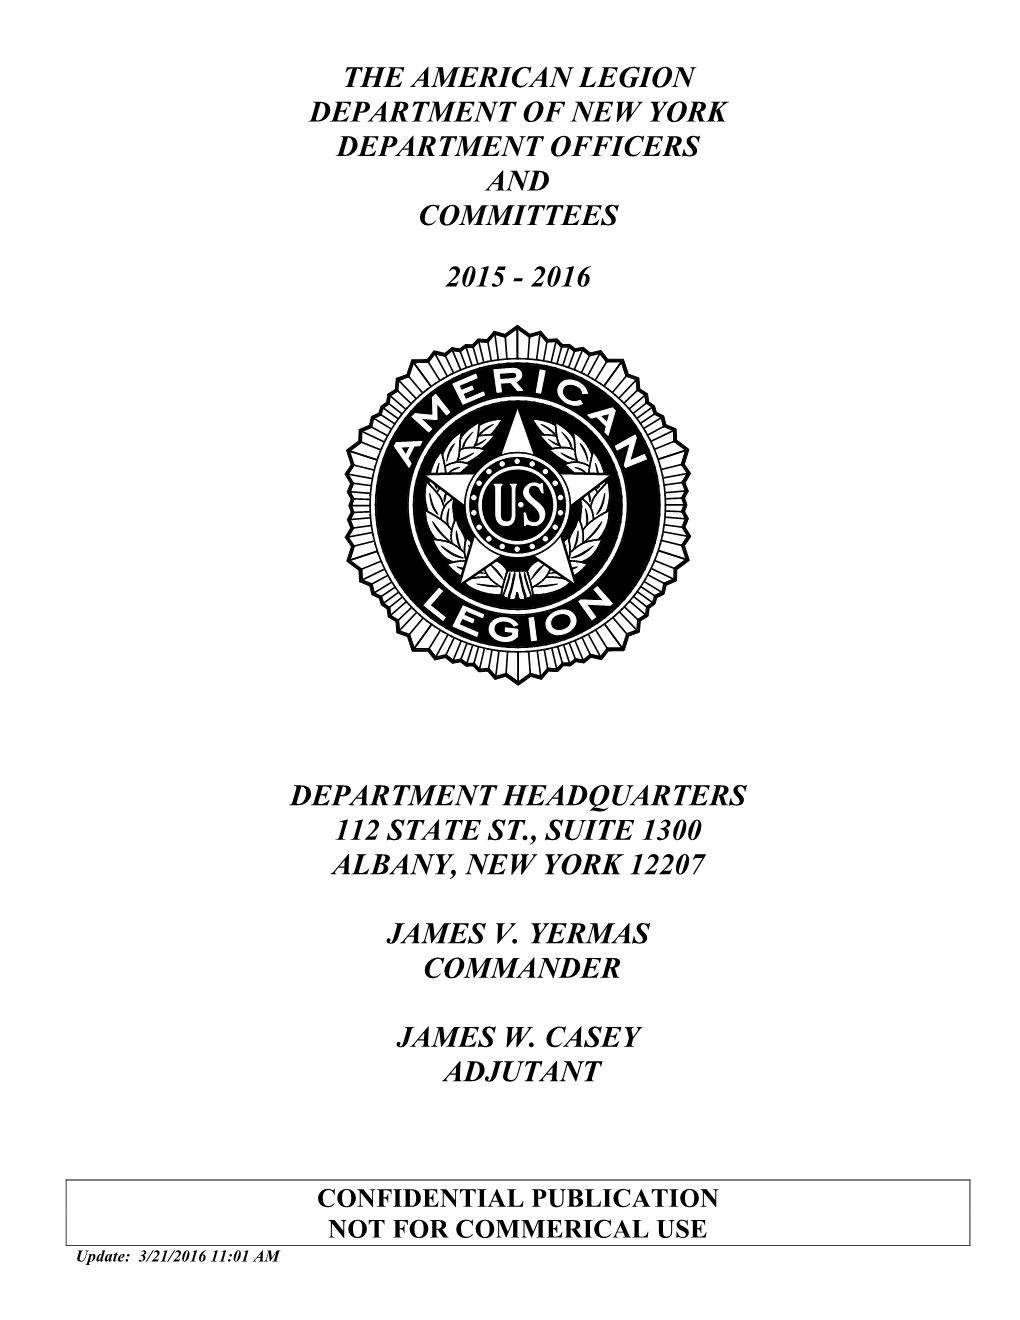 The American Legion Department of New York Department Officers and Committees